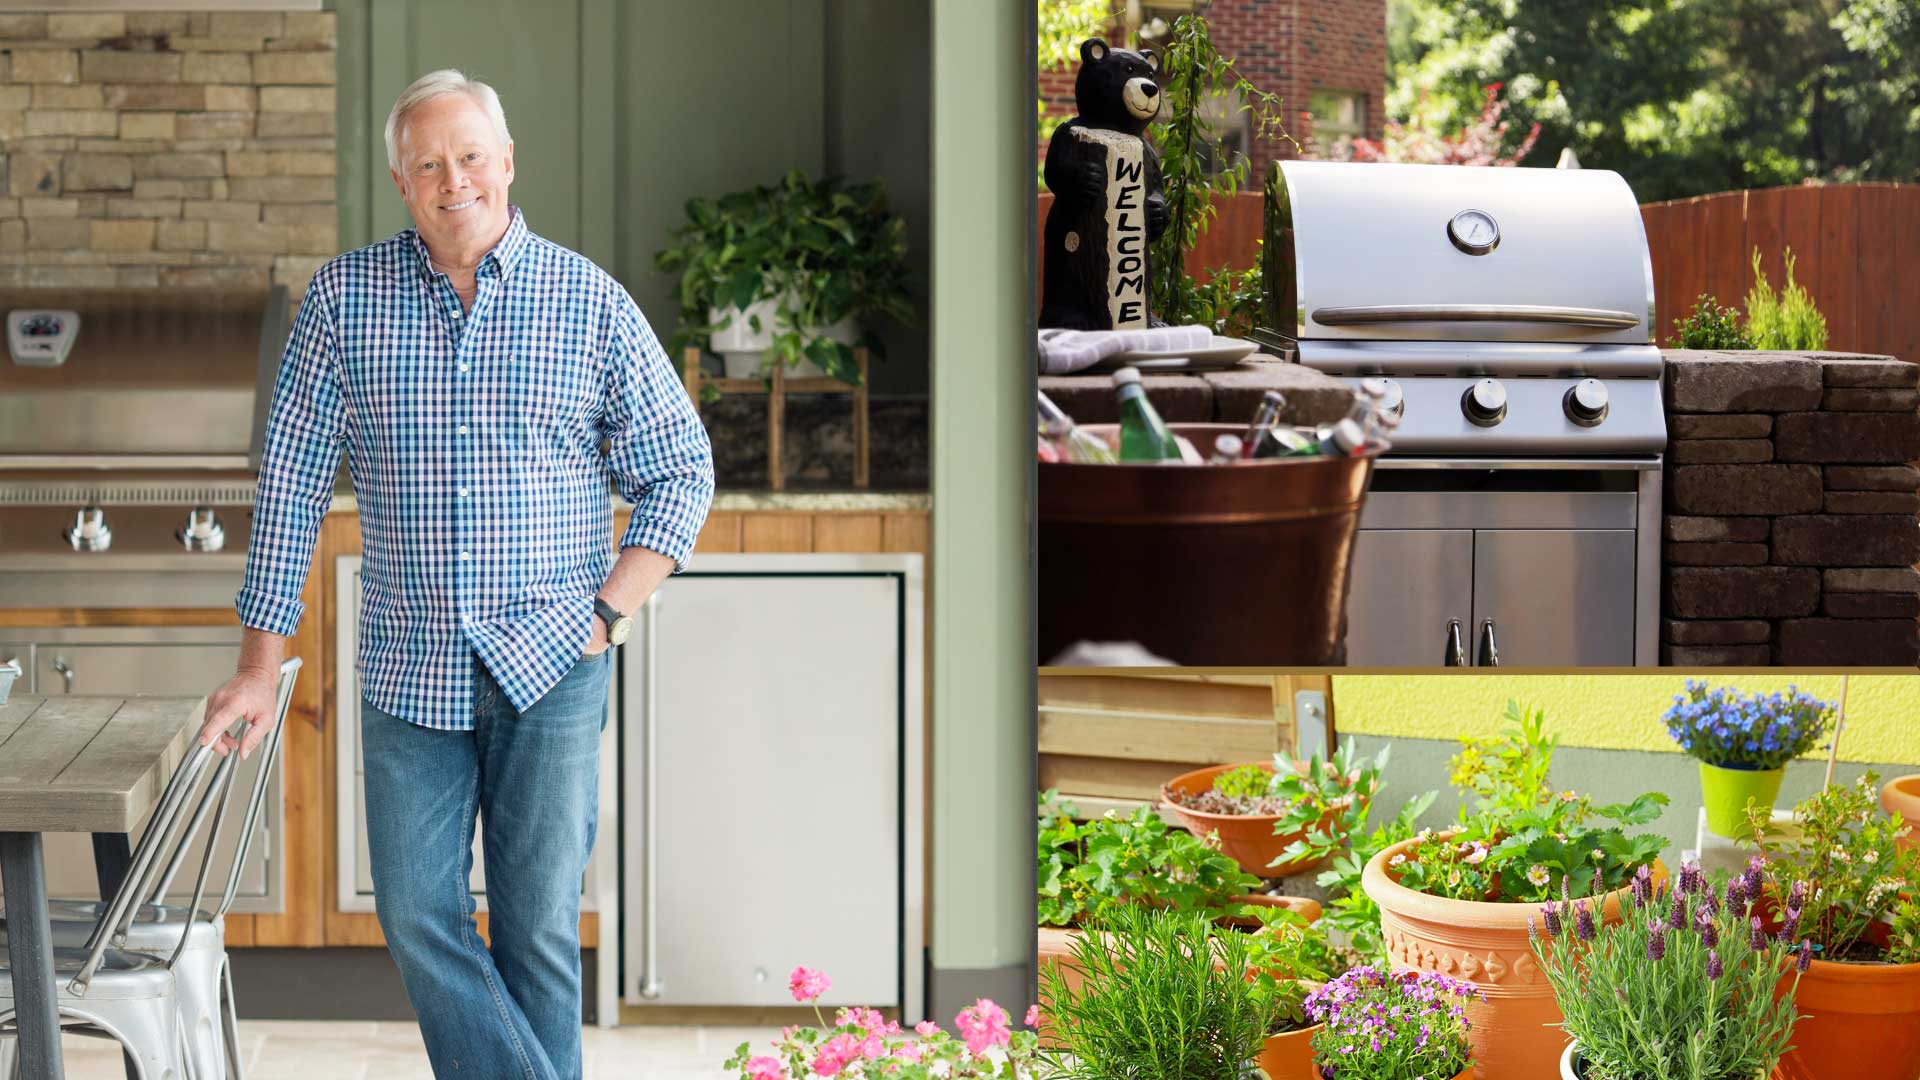 Today's Homeowner host Danny Lipford, seen with a barbecue grill and potted flowers